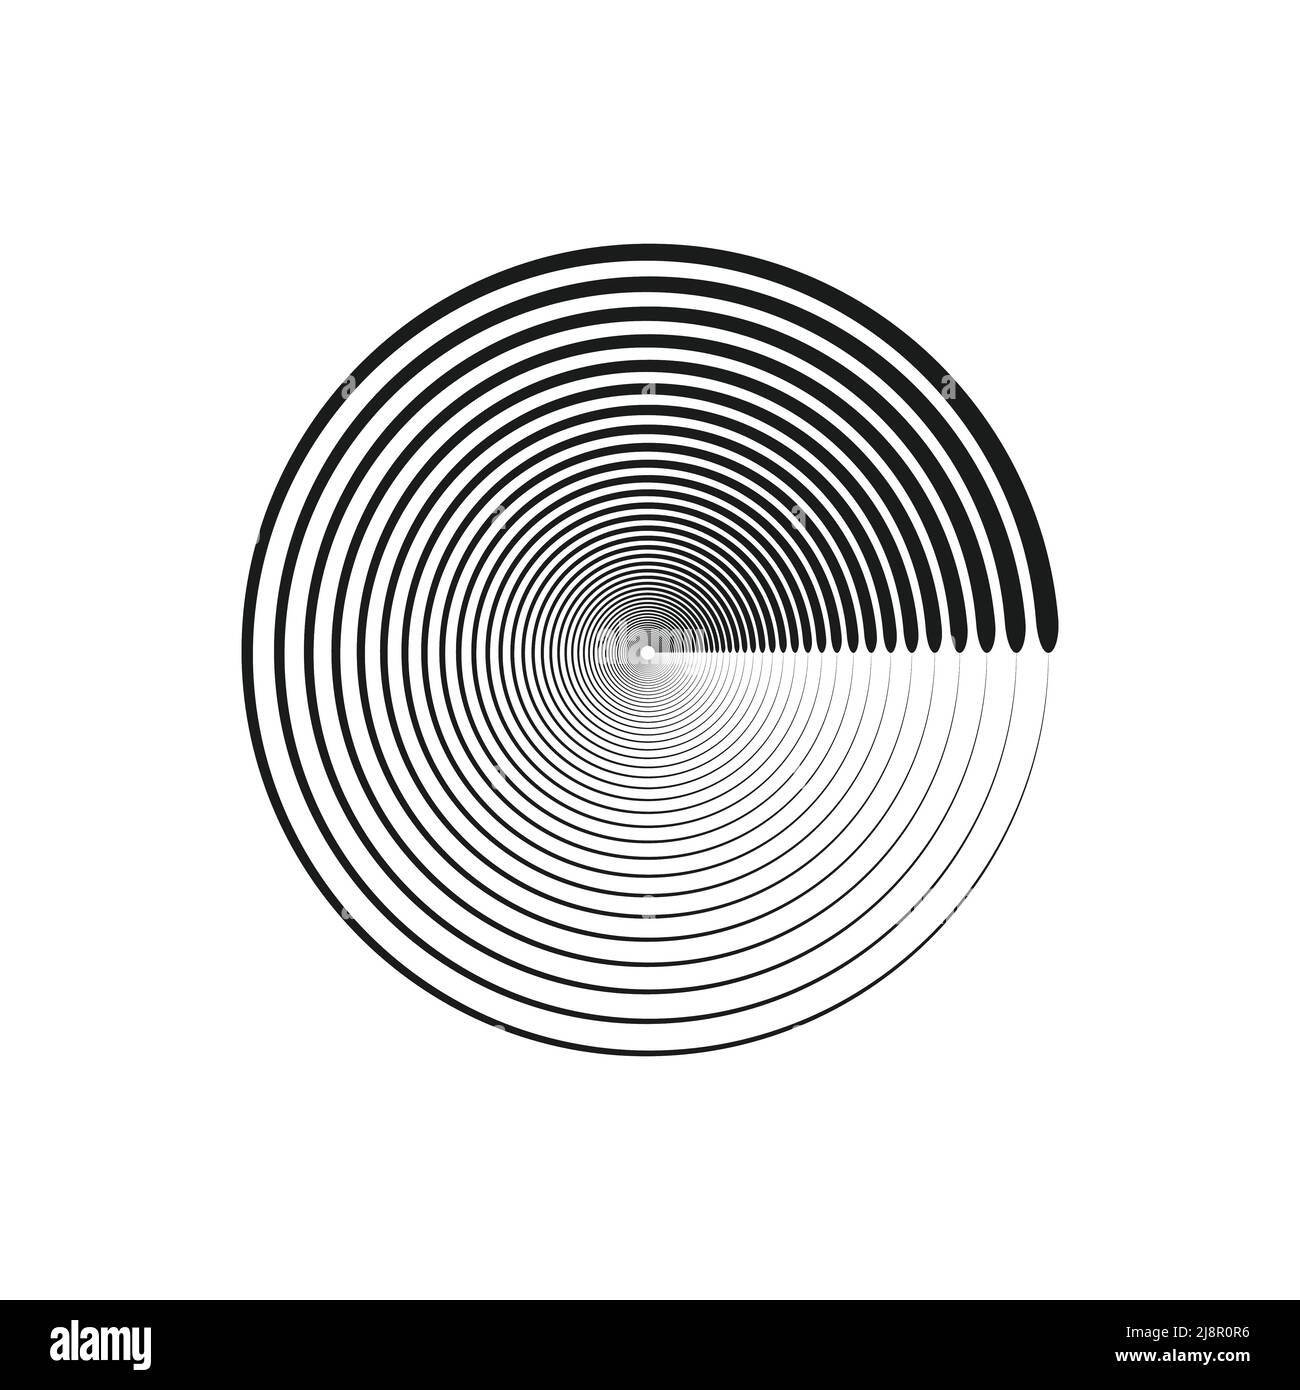 Concentric circle line ring background Stock Vector